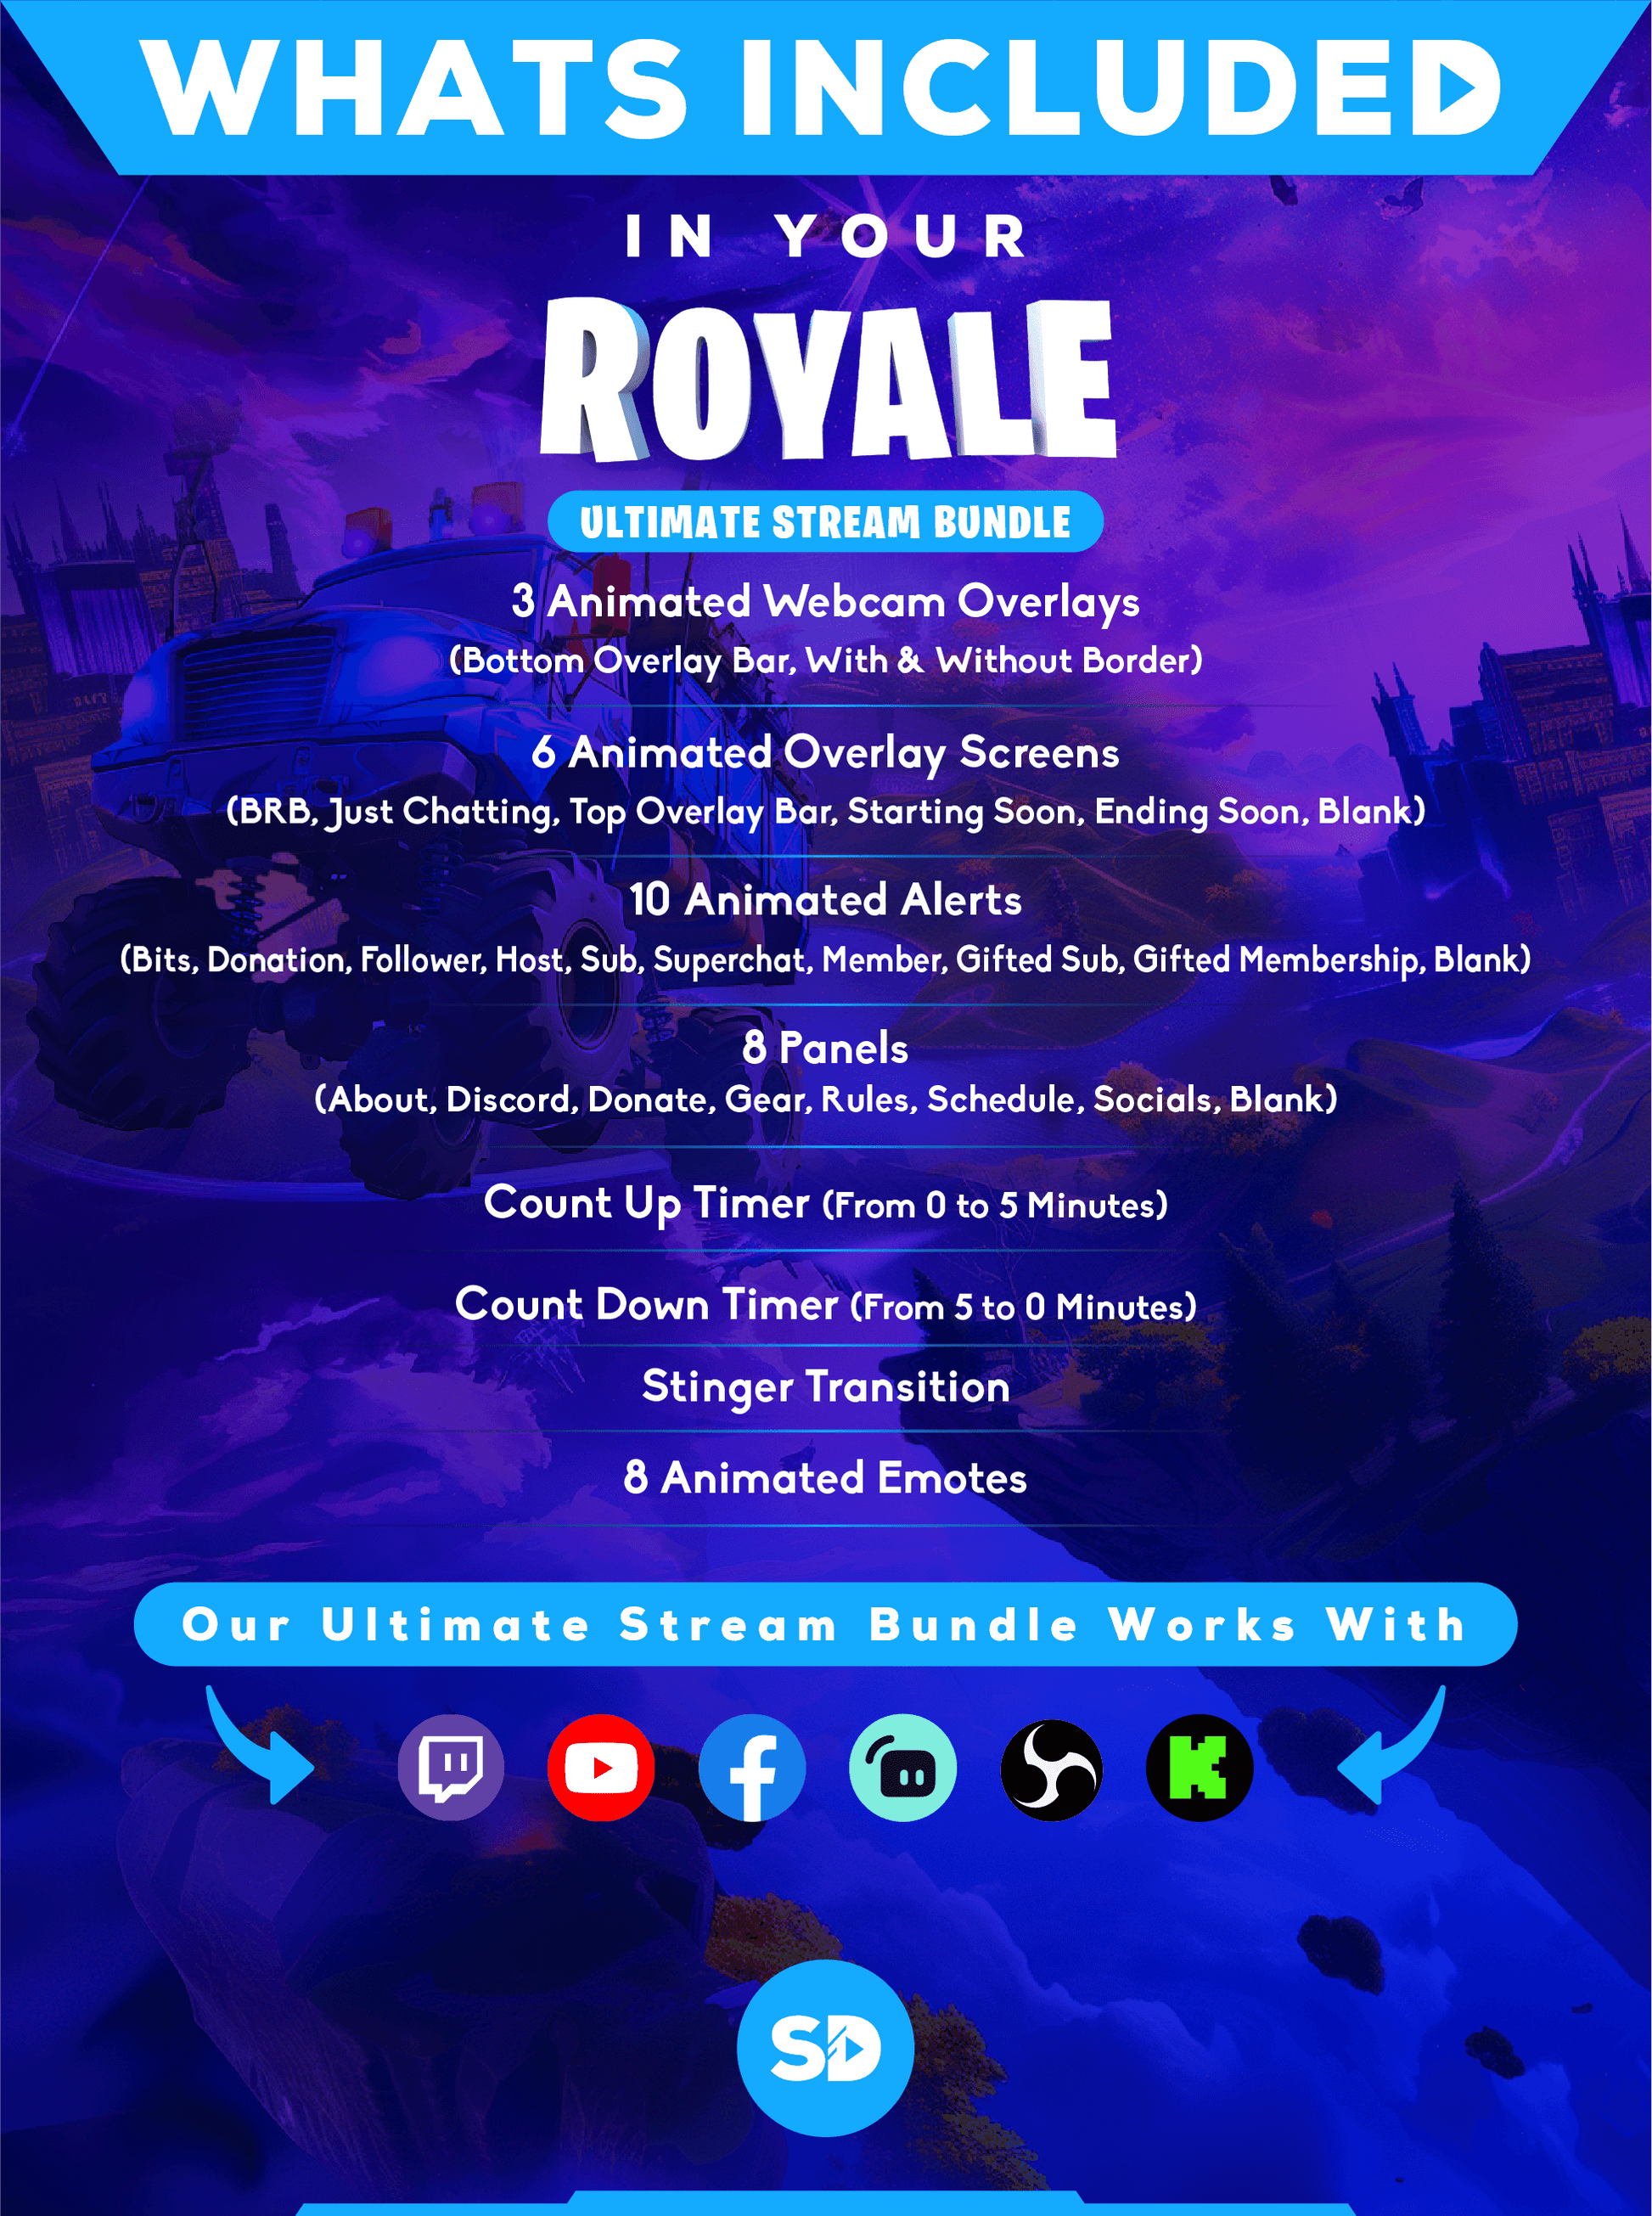 Ultimate stream package whats included in your bundle royale stream designz